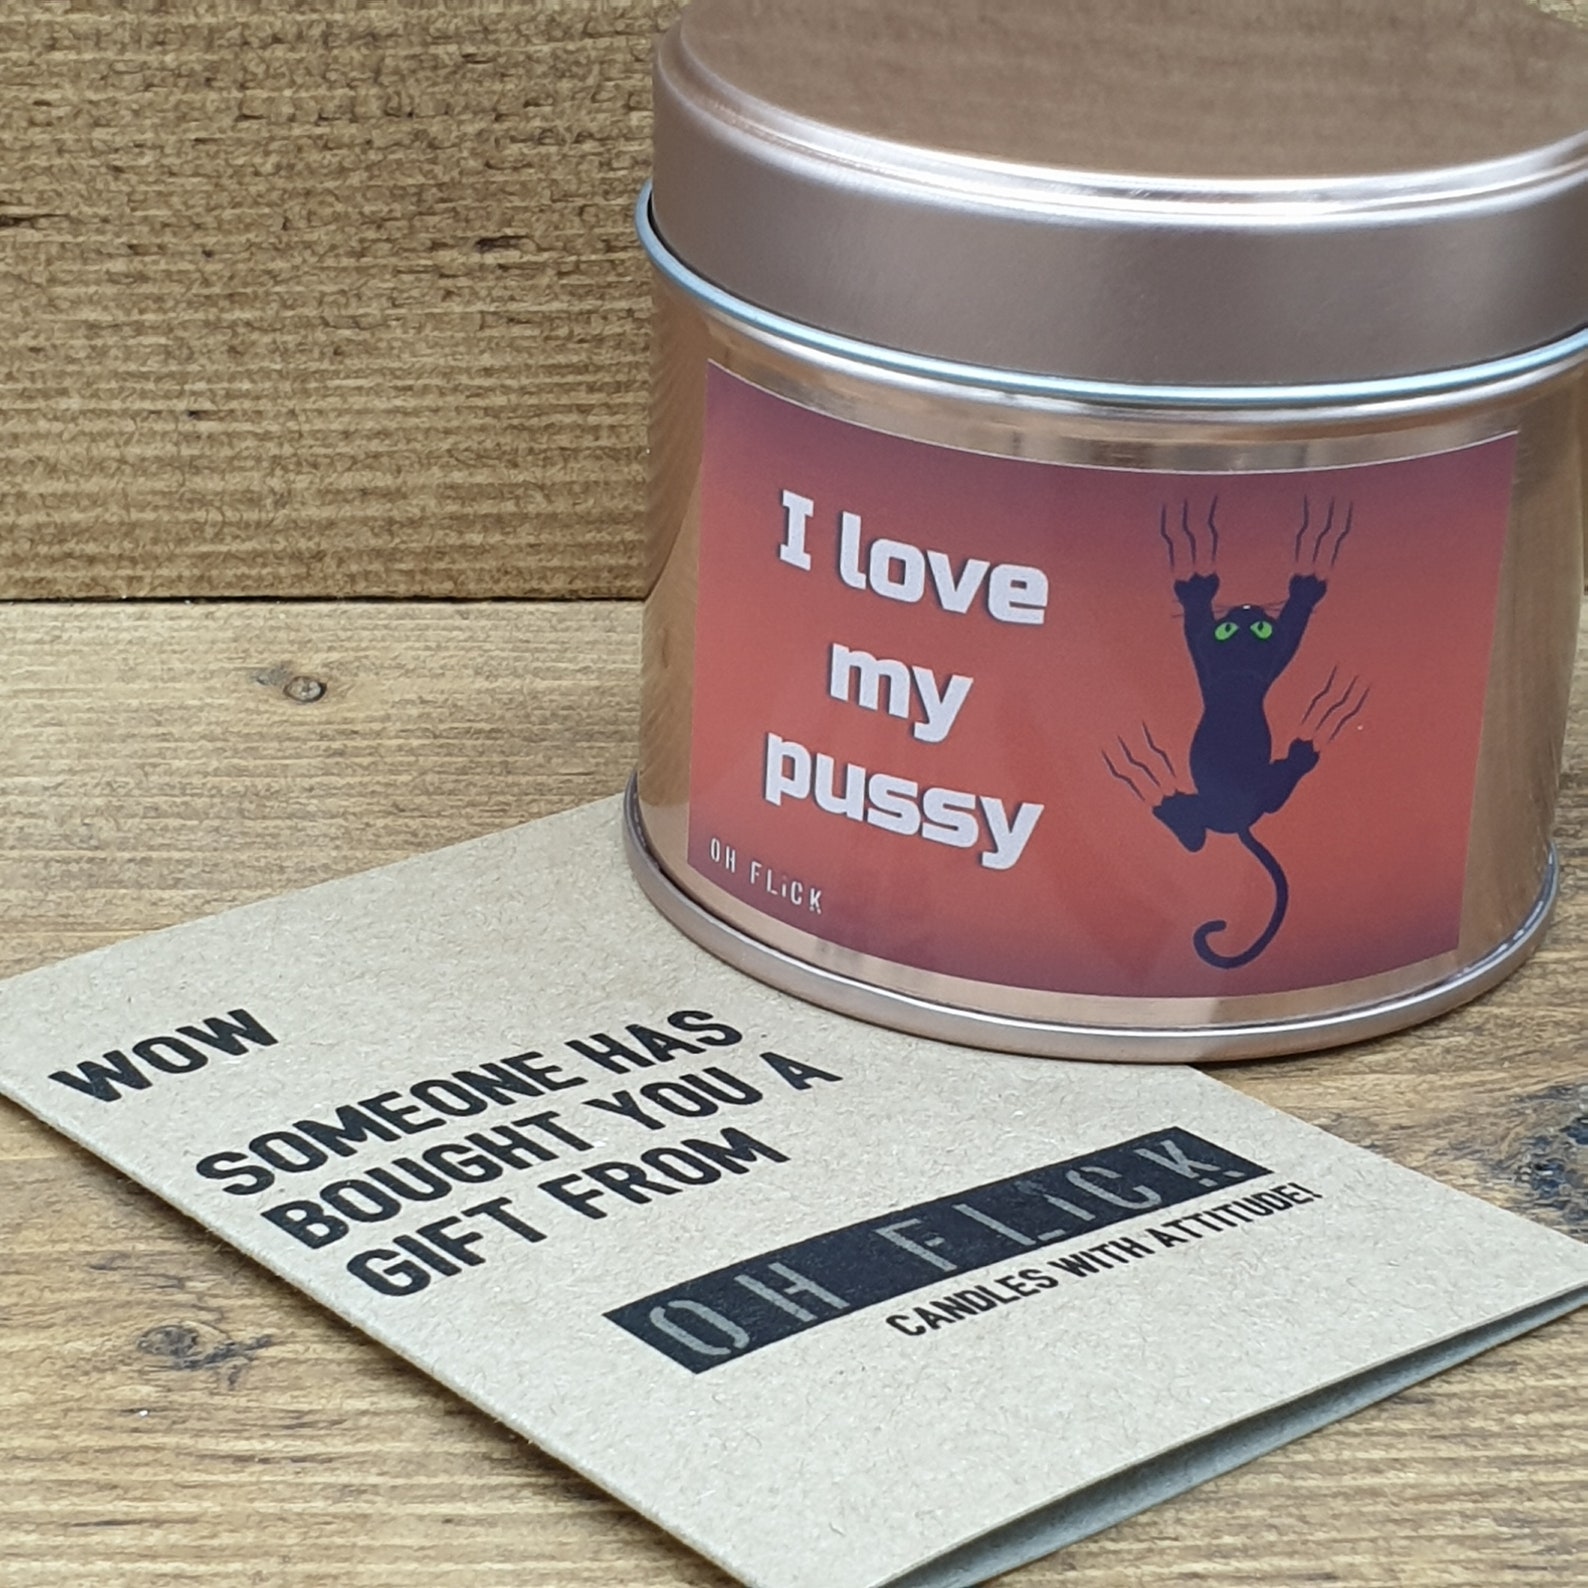 I Love My Pussy Gorgeous White Coconut Wax Candle With A E